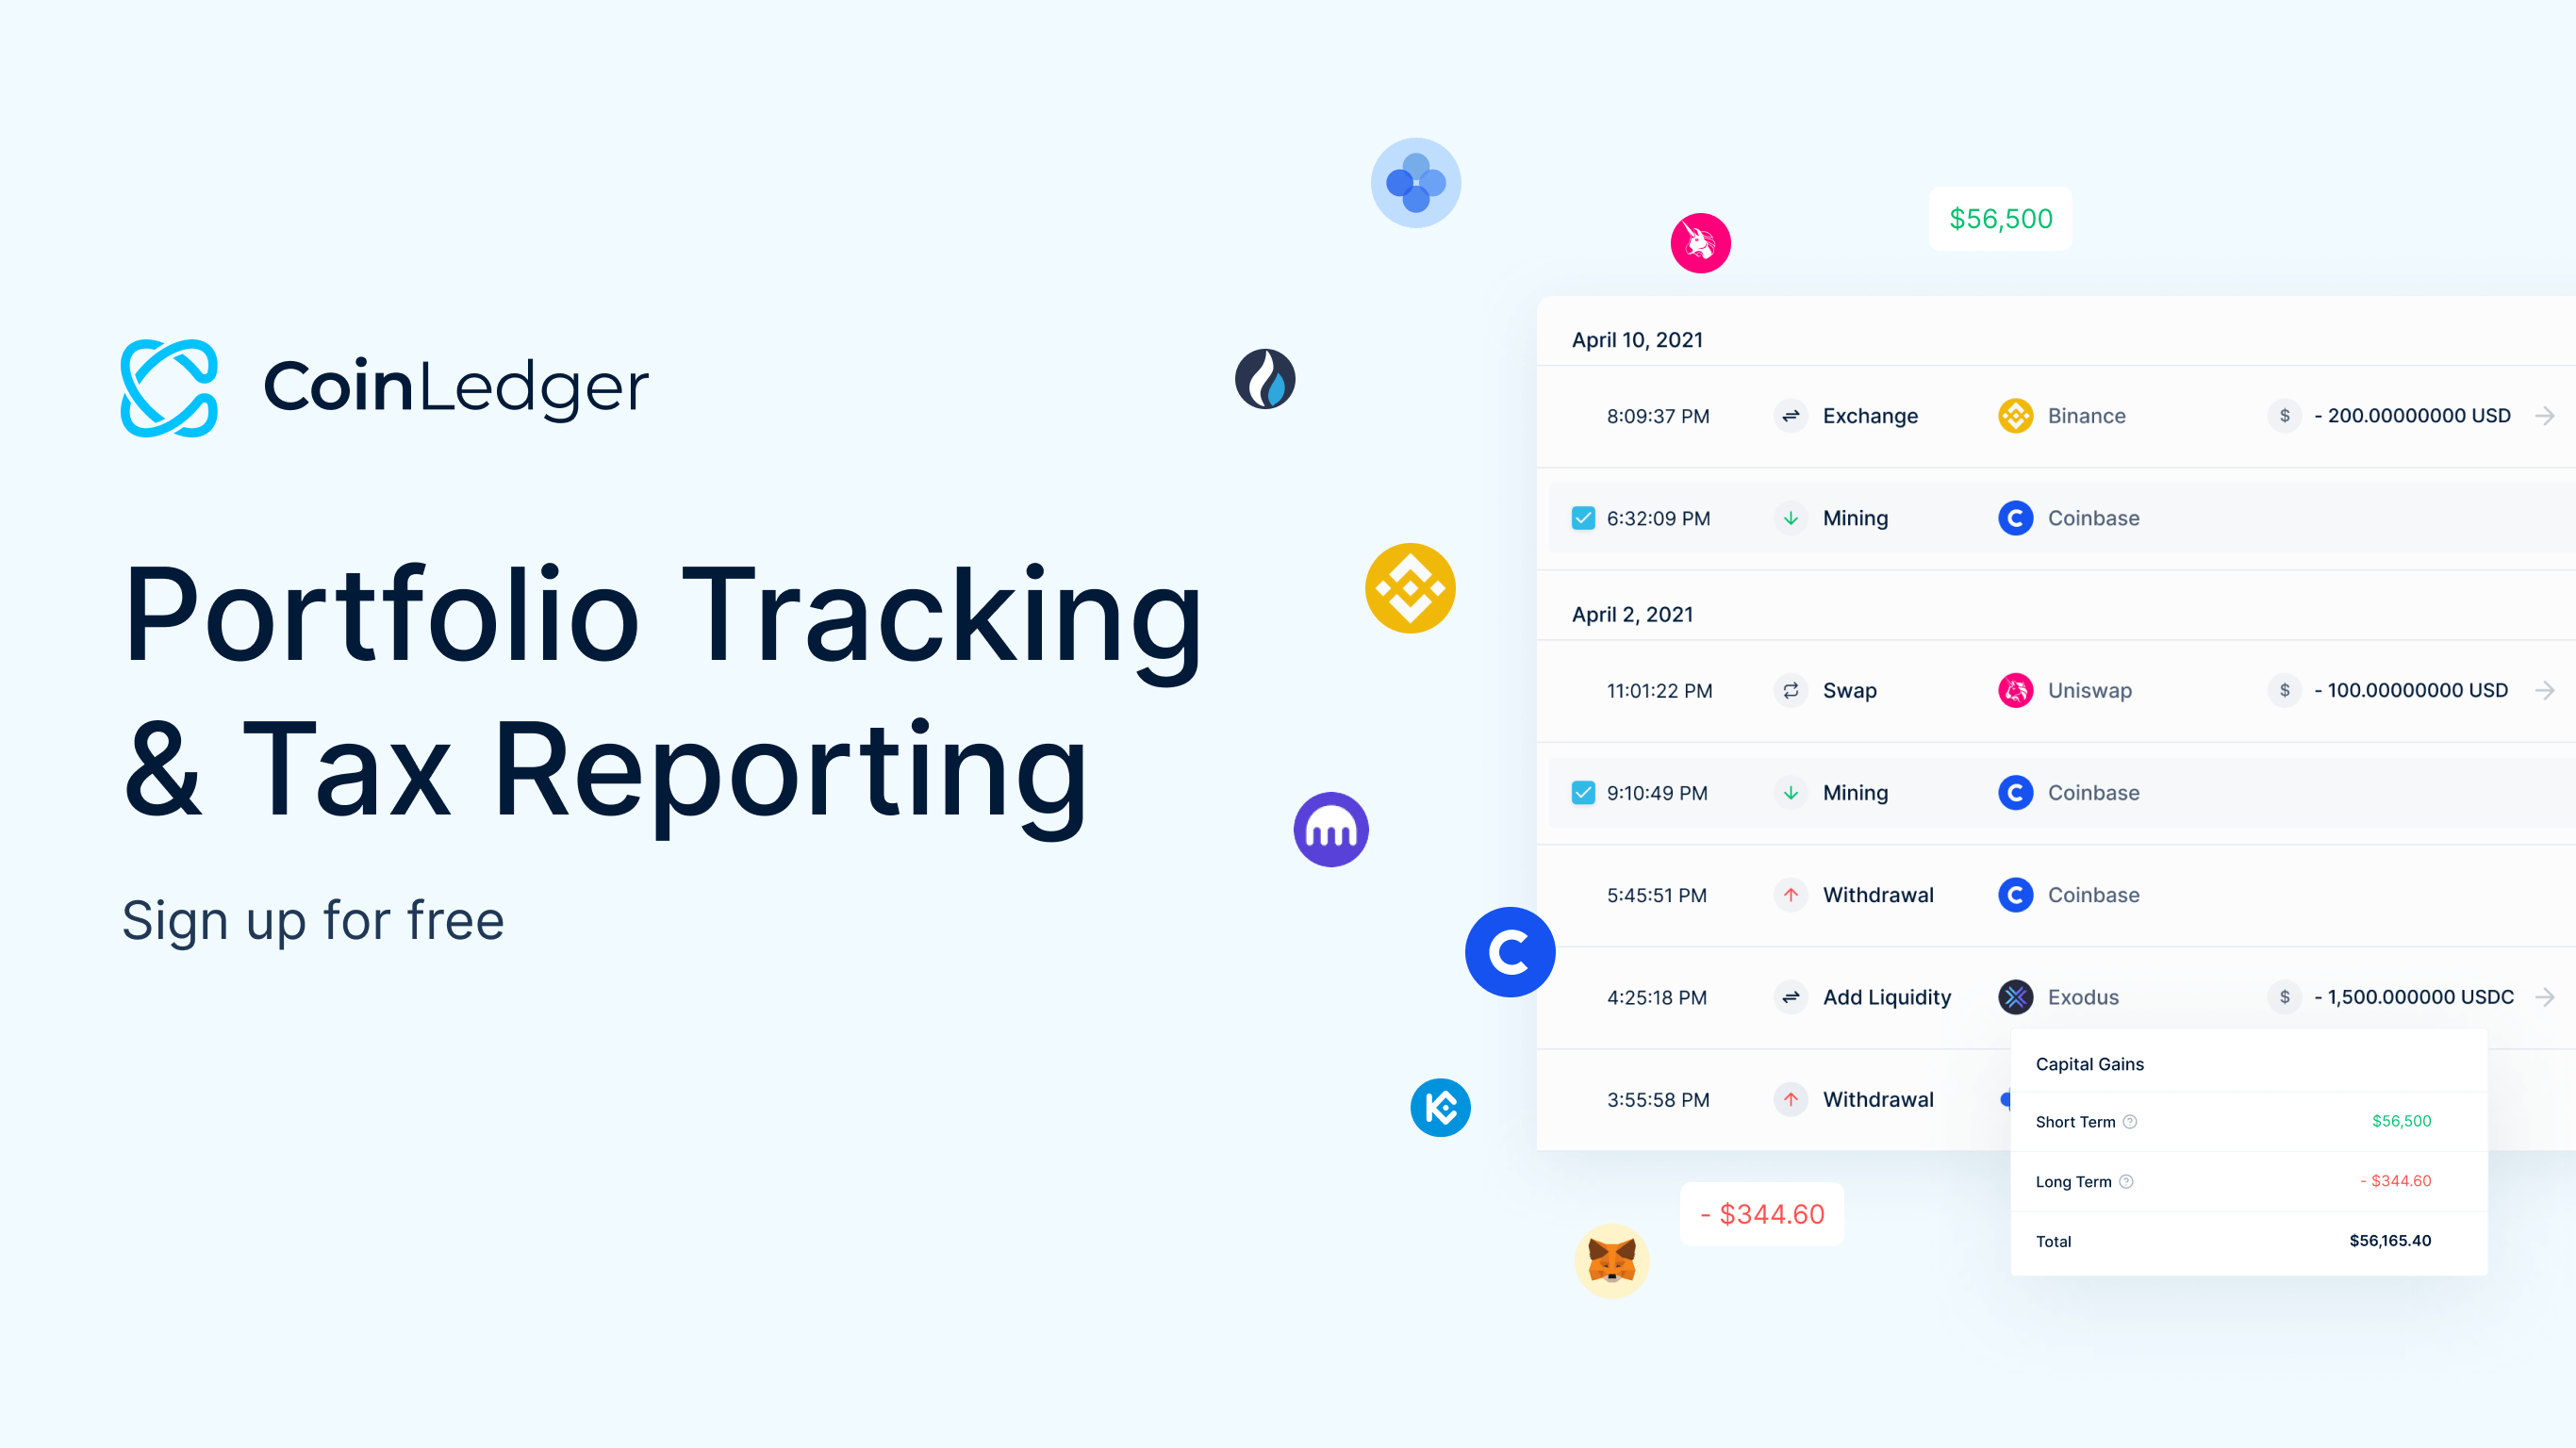 CoinLedger tax reporting and portfolio tracking